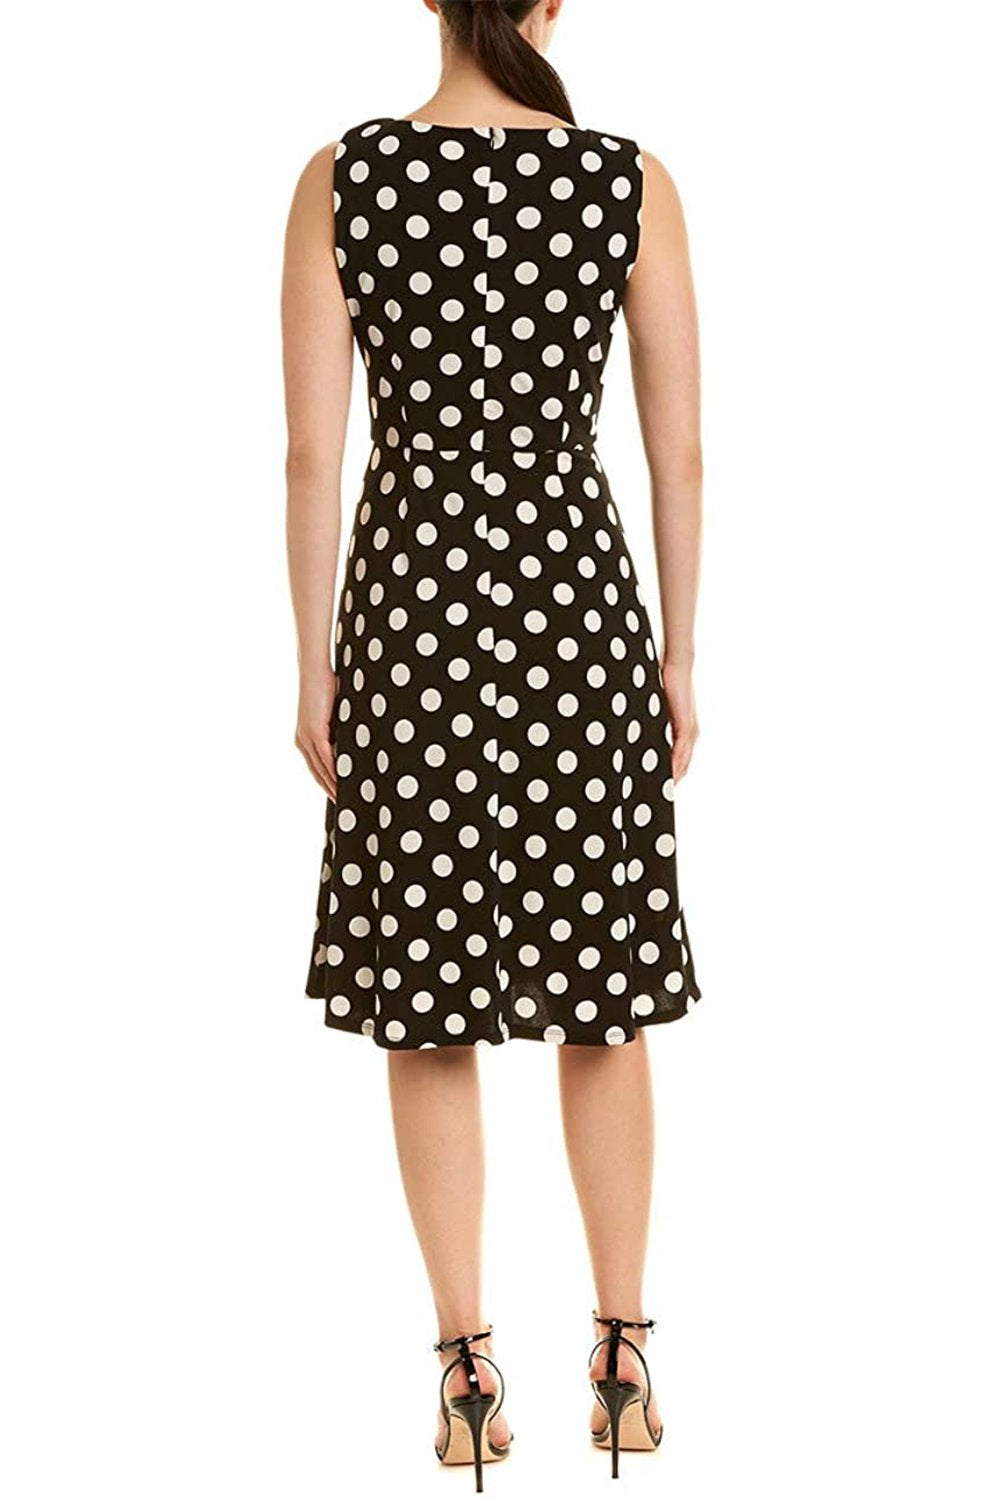 Taylor - 1379M Polka Dot Jersey A-line Dress In Black and White